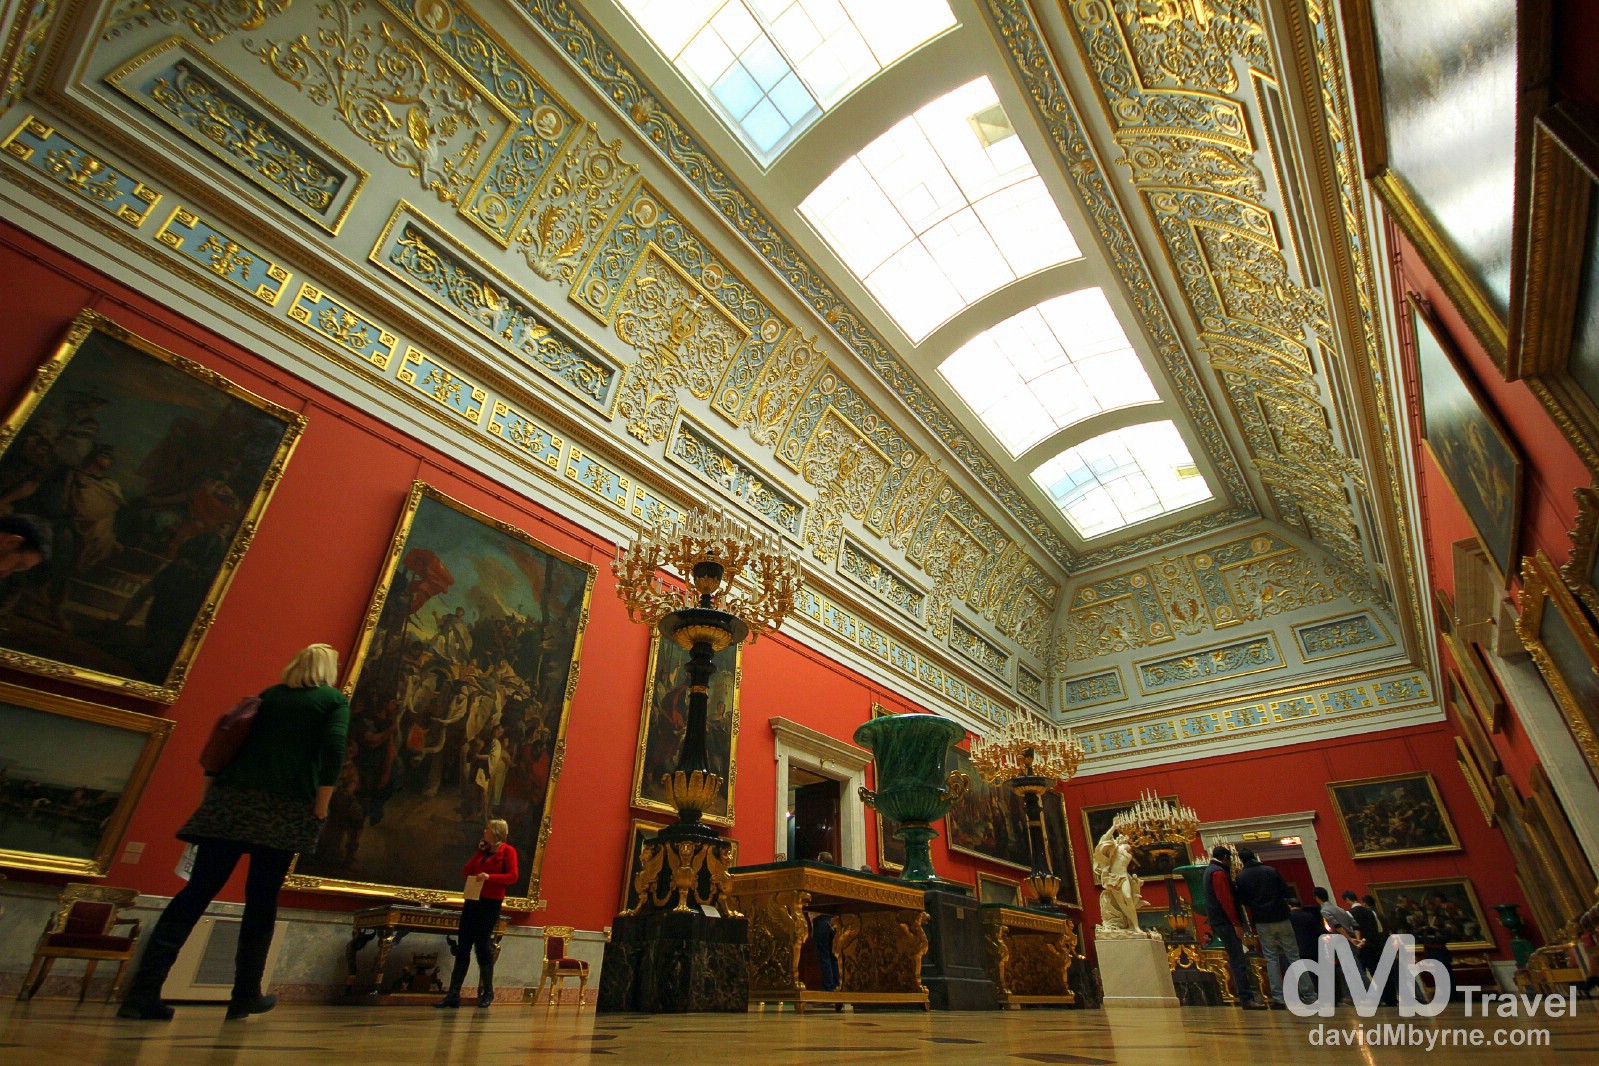 A section of the Hermitage Museum in the Winter Palace, St Petersburg, Russia. November 22nd 2012. 